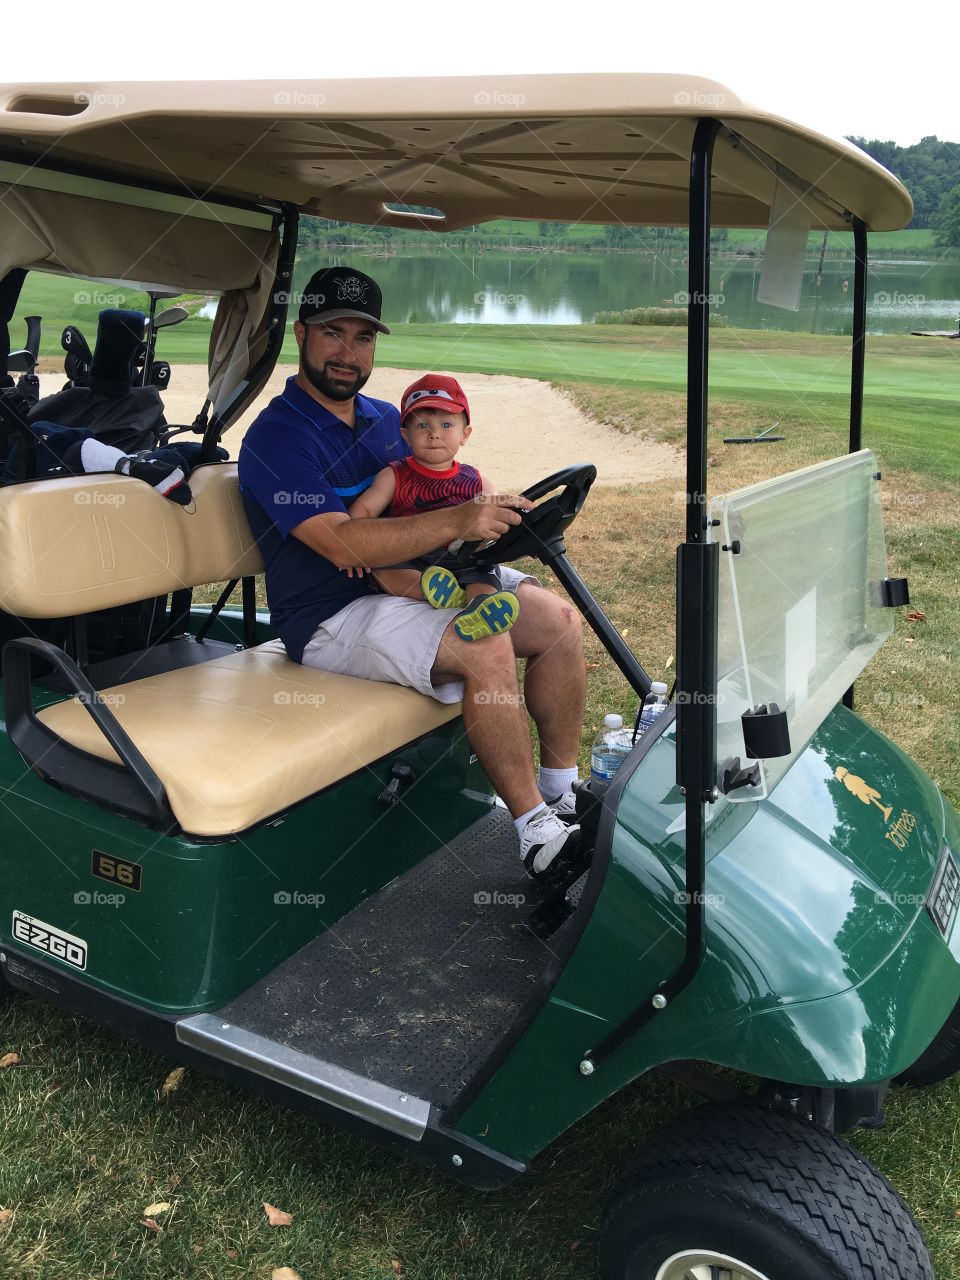 No kids on the course...unless they are cute!!